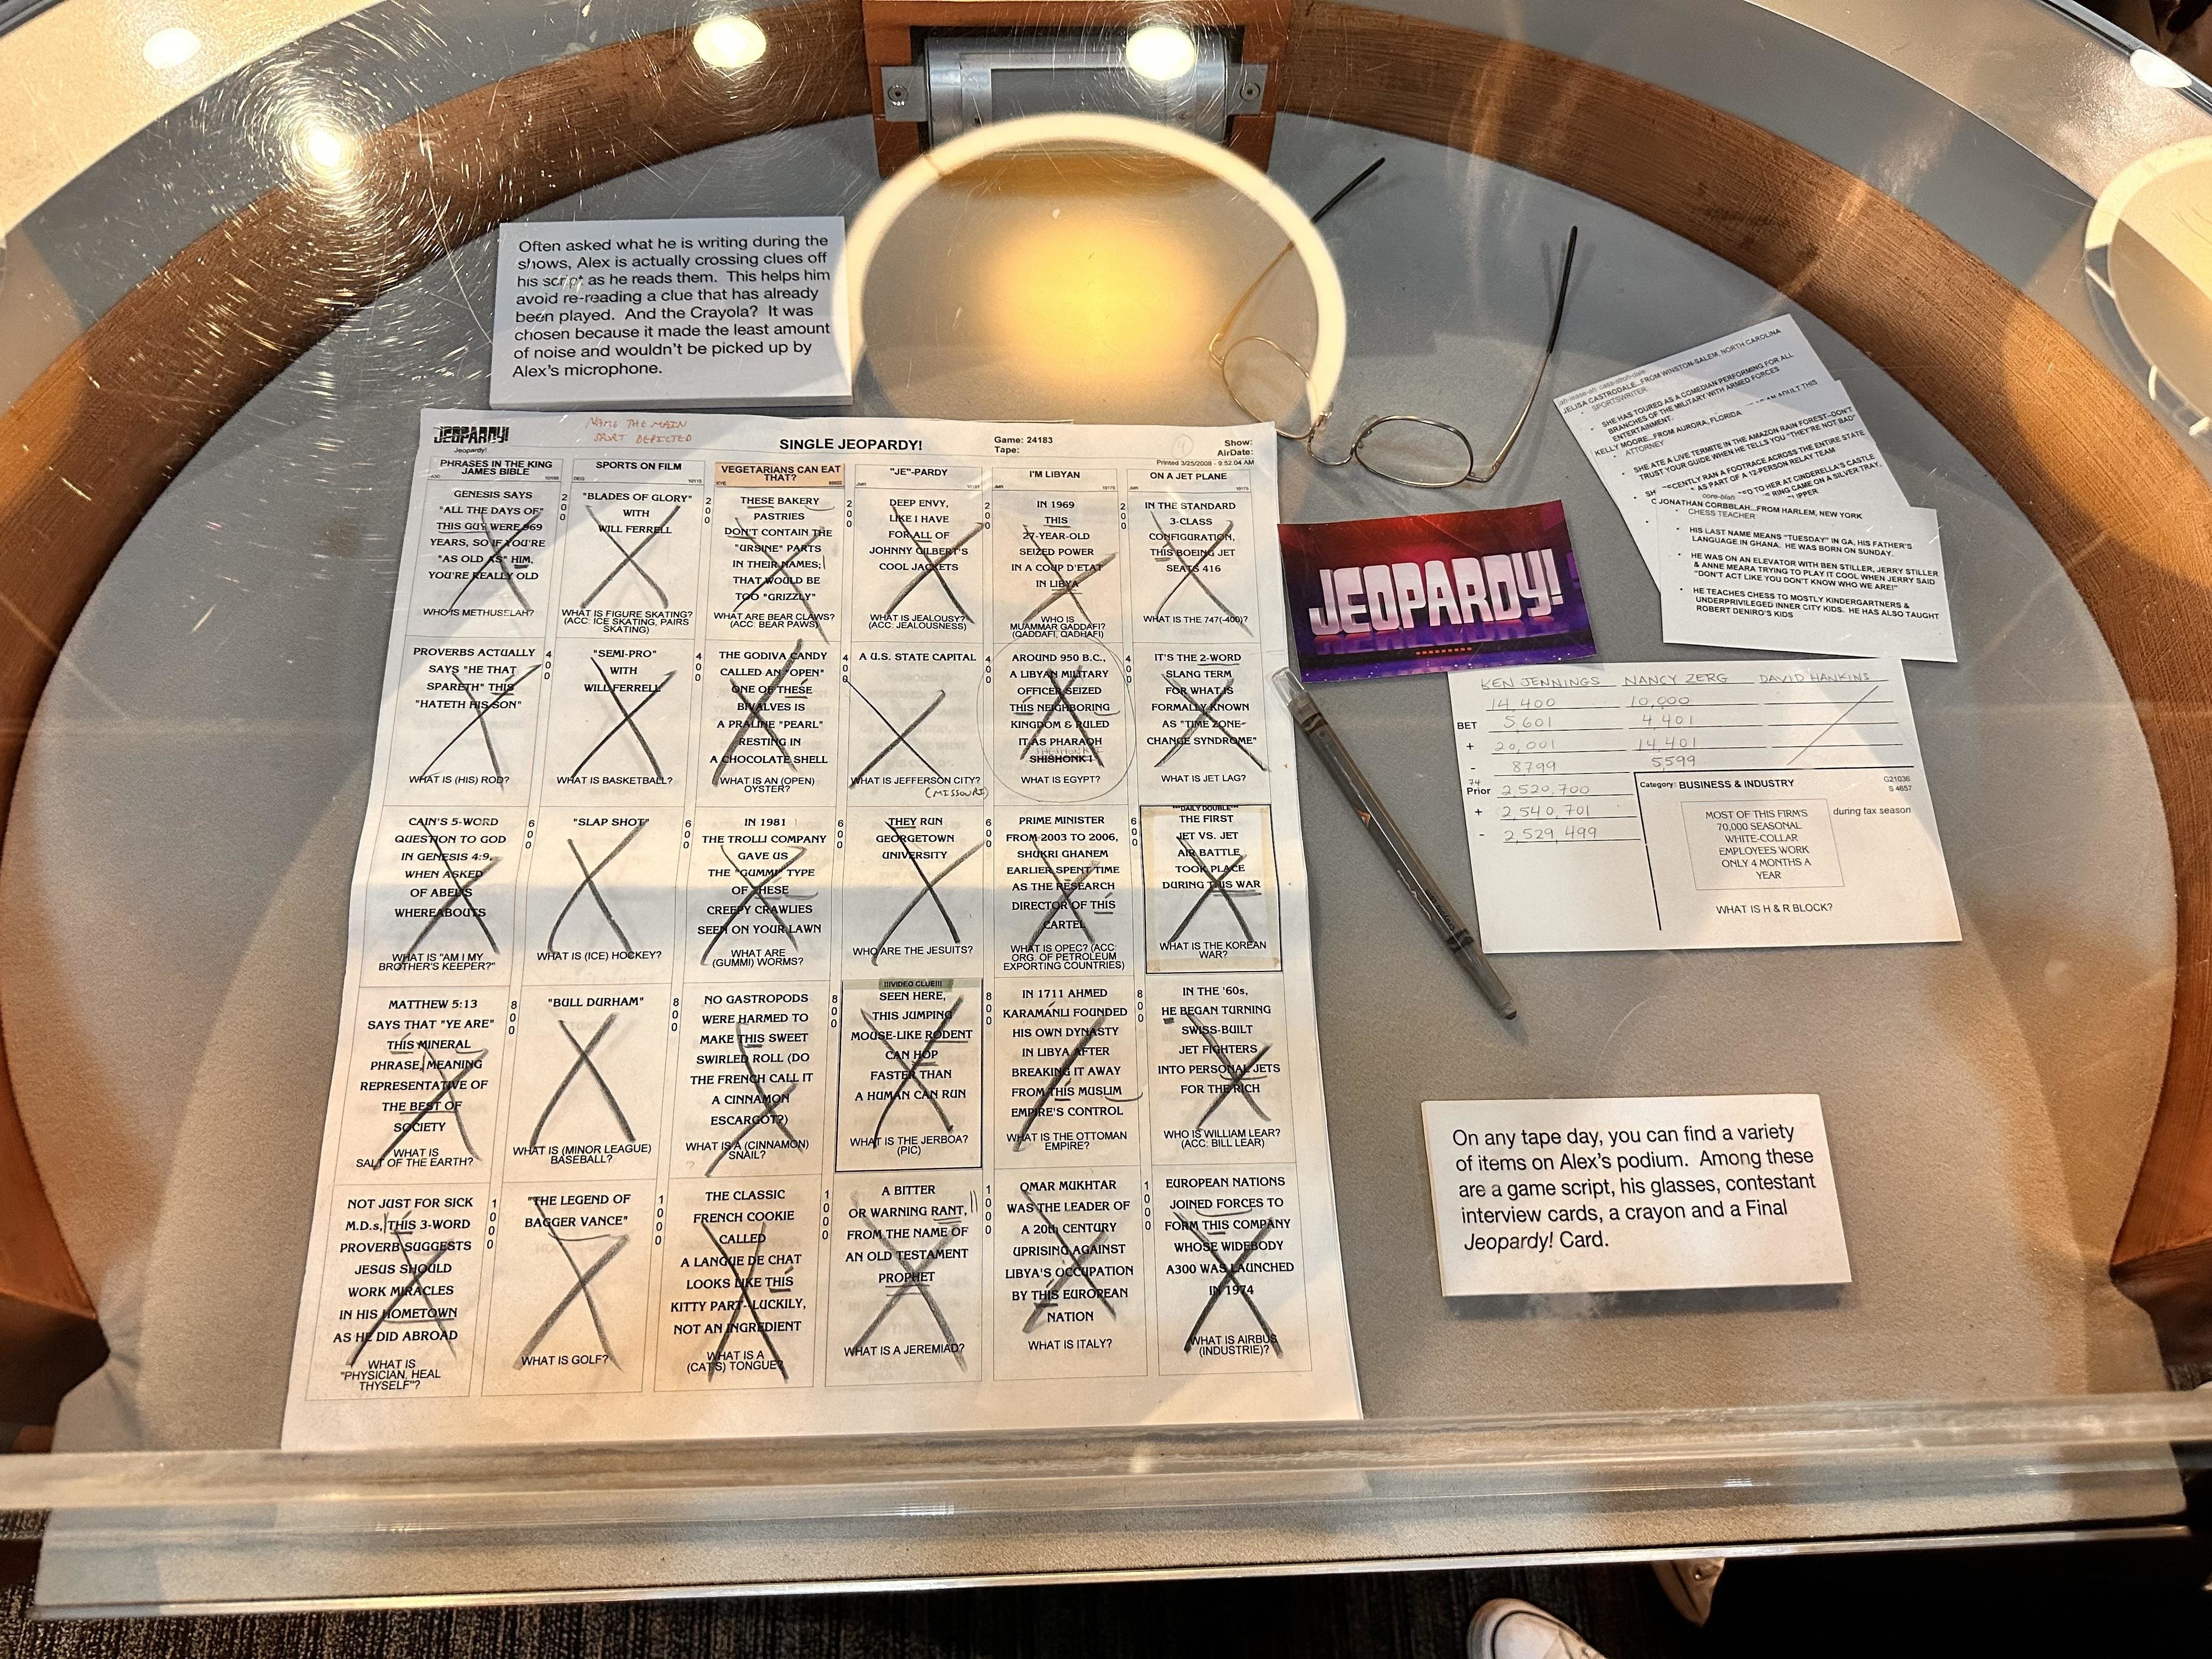 A podium showing a sheet of paper with clues X-ed out, contestant interview cards,  eyeglasses, a crayon, and a Final Jeopardy card